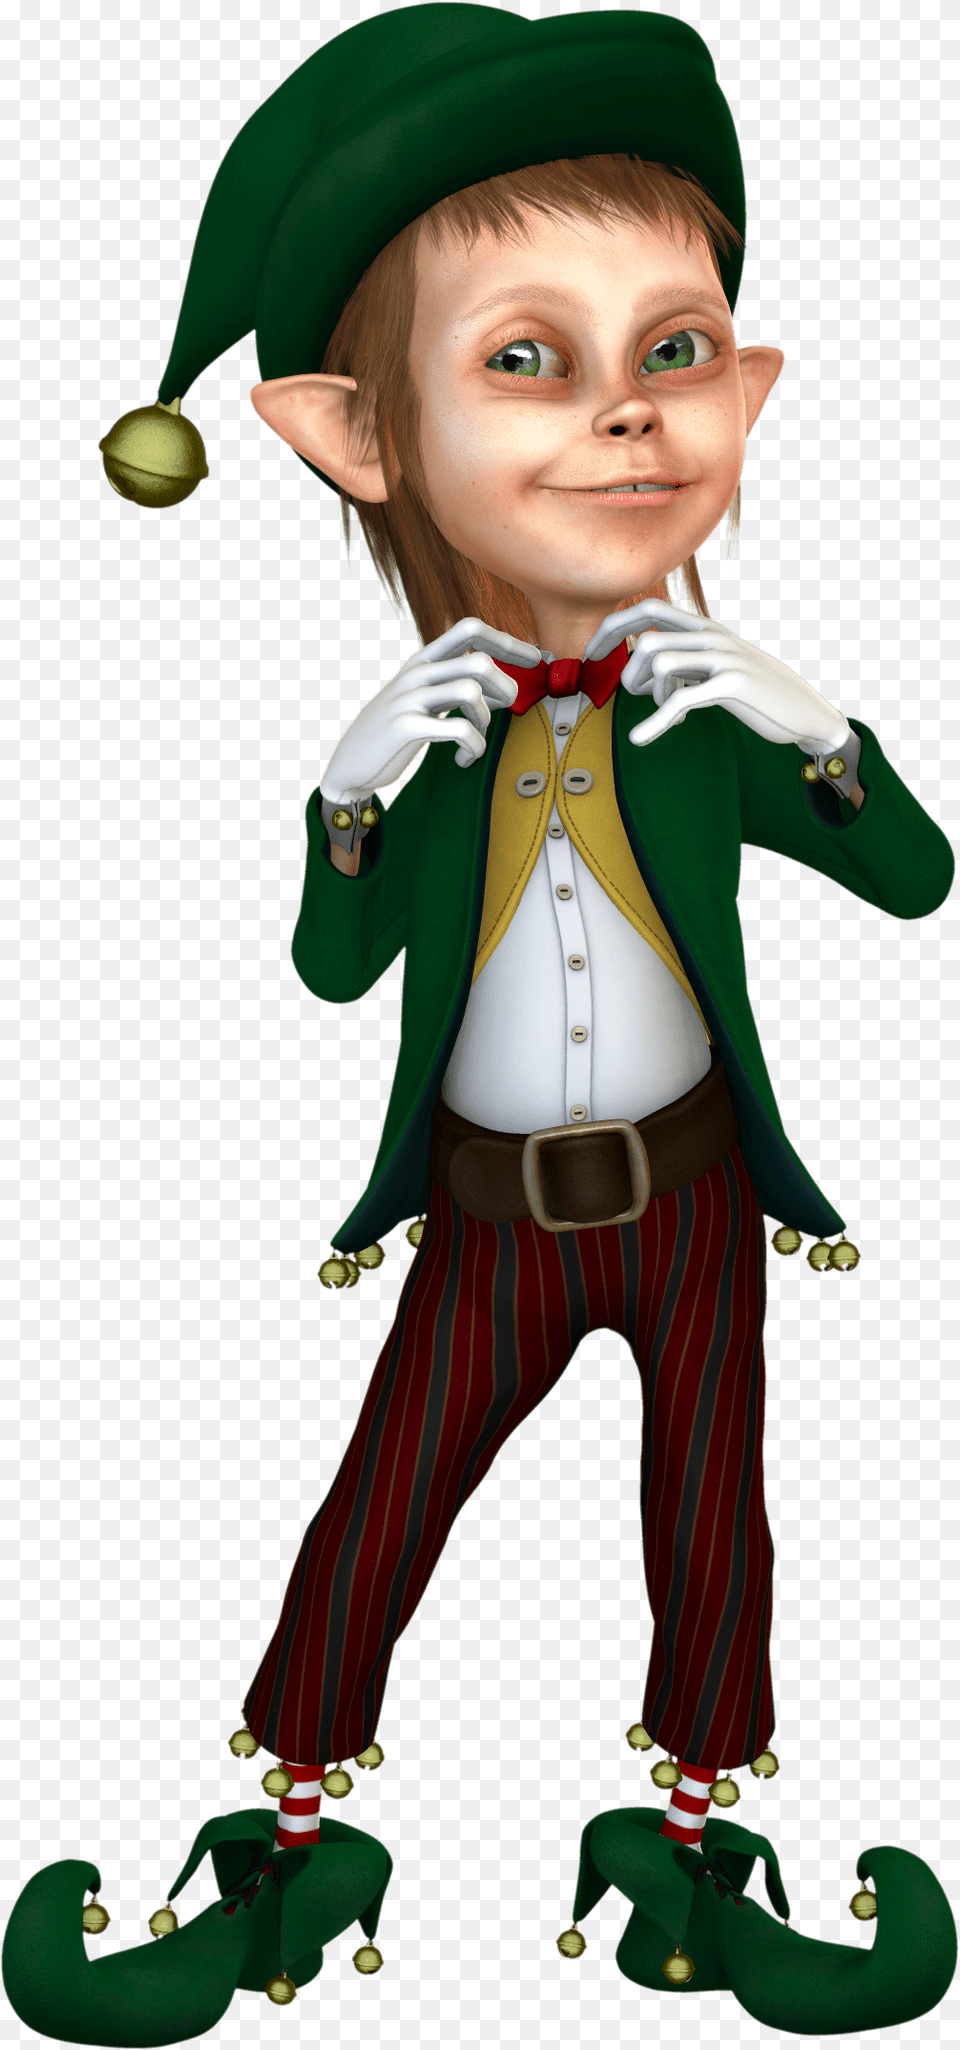 Christmas Elf Clipart Throughout Elf Clipart Christmas Elf Transparent Background, Clothing, Glove, Baby, Person Png Image